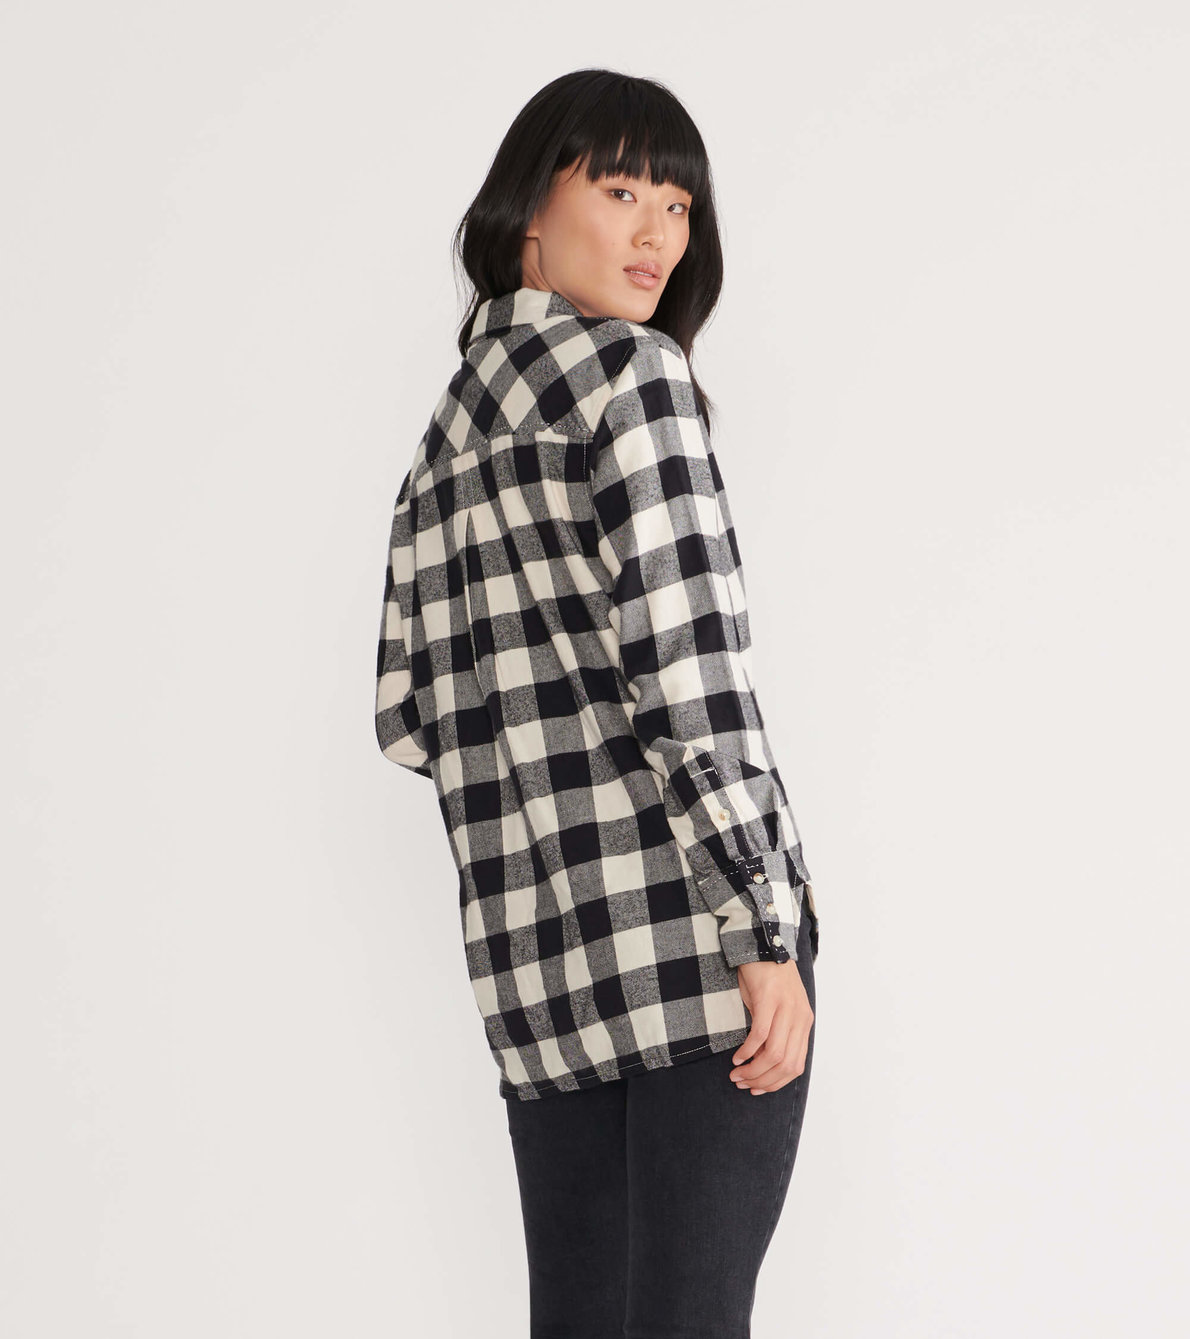 View larger image of Black Plaid Women's Heritage Flannel Shirt